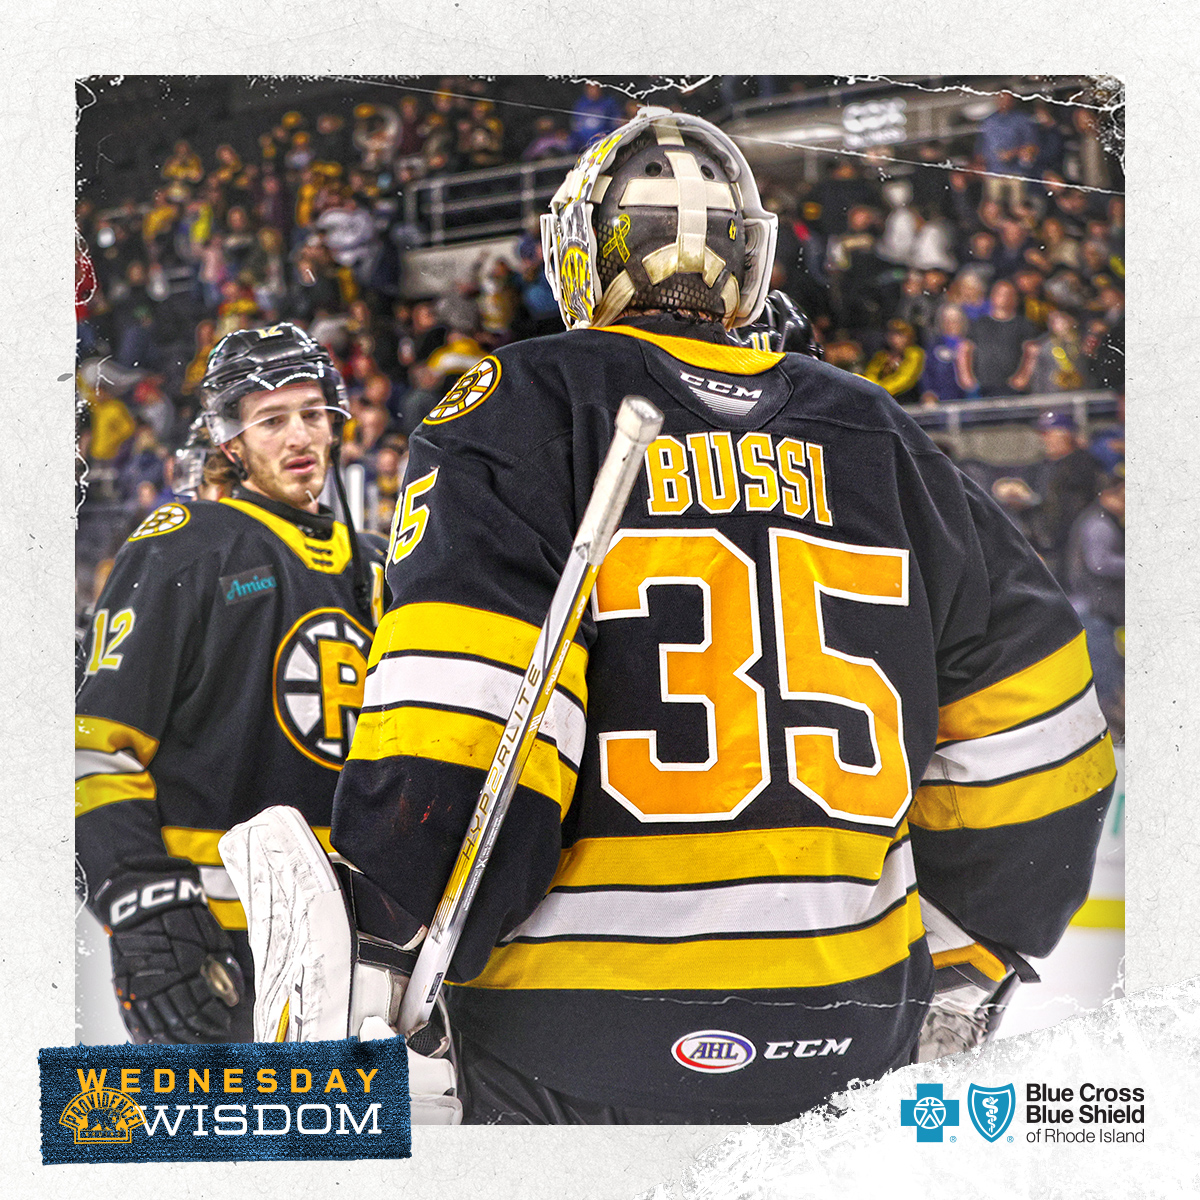 Brandon Bussi's 34-save Shutout in Game 2 was the first #AHLBruins Playoff SO since 2014, when Niklas Svedberg stopped 20 shots in a 4-0 win over WBS 🤔 #WednesdayWisdom x @BCBSRI